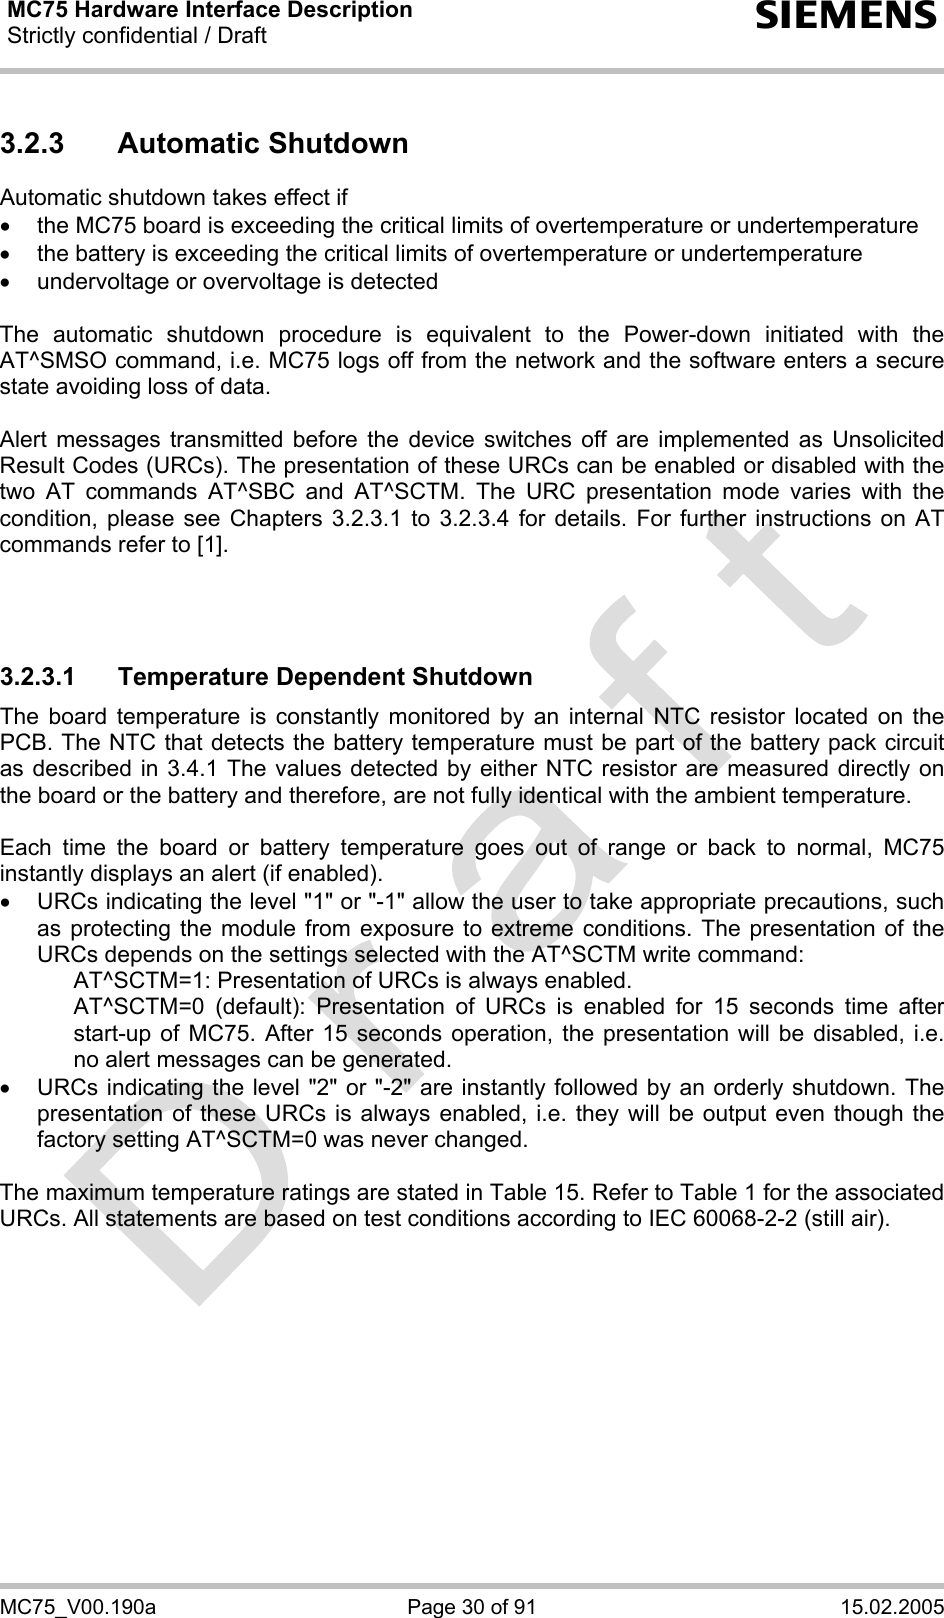 MC75 Hardware Interface Description Strictly confidential / Draft  s MC75_V00.190a  Page 30 of 91  15.02.2005 3.2.3 Automatic Shutdown Automatic shutdown takes effect if •  the MC75 board is exceeding the critical limits of overtemperature or undertemperature •  the battery is exceeding the critical limits of overtemperature or undertemperature •  undervoltage or overvoltage is detected  The automatic shutdown procedure is equivalent to the Power-down initiated with the AT^SMSO command, i.e. MC75 logs off from the network and the software enters a secure state avoiding loss of data.   Alert messages transmitted before the device switches off are implemented as Unsolicited Result Codes (URCs). The presentation of these URCs can be enabled or disabled with the two AT commands AT^SBC and AT^SCTM. The URC presentation mode varies with the condition, please see Chapters 3.2.3.1 to 3.2.3.4 for details. For further instructions on AT commands refer to [1].    3.2.3.1  Temperature Dependent Shutdown The board temperature is constantly monitored by an internal NTC resistor located on the PCB. The NTC that detects the battery temperature must be part of the battery pack circuit as described in 3.4.1 The values detected by either NTC resistor are measured directly on the board or the battery and therefore, are not fully identical with the ambient temperature.   Each time the board or battery temperature goes out of range or back to normal, MC75 instantly displays an alert (if enabled). •  URCs indicating the level &quot;1&quot; or &quot;-1&quot; allow the user to take appropriate precautions, such as protecting the module from exposure to extreme conditions. The presentation of the URCs depends on the settings selected with the AT^SCTM write command:     AT^SCTM=1: Presentation of URCs is always enabled.      AT^SCTM=0 (default): Presentation of URCs is enabled for 15 seconds time after start-up of MC75. After 15 seconds operation, the presentation will be disabled, i.e. no alert messages can be generated.  •  URCs indicating the level &quot;2&quot; or &quot;-2&quot; are instantly followed by an orderly shutdown. The presentation of these URCs is always enabled, i.e. they will be output even though the factory setting AT^SCTM=0 was never changed.  The maximum temperature ratings are stated in Table 15. Refer to Table 1 for the associated URCs. All statements are based on test conditions according to IEC 60068-2-2 (still air).  